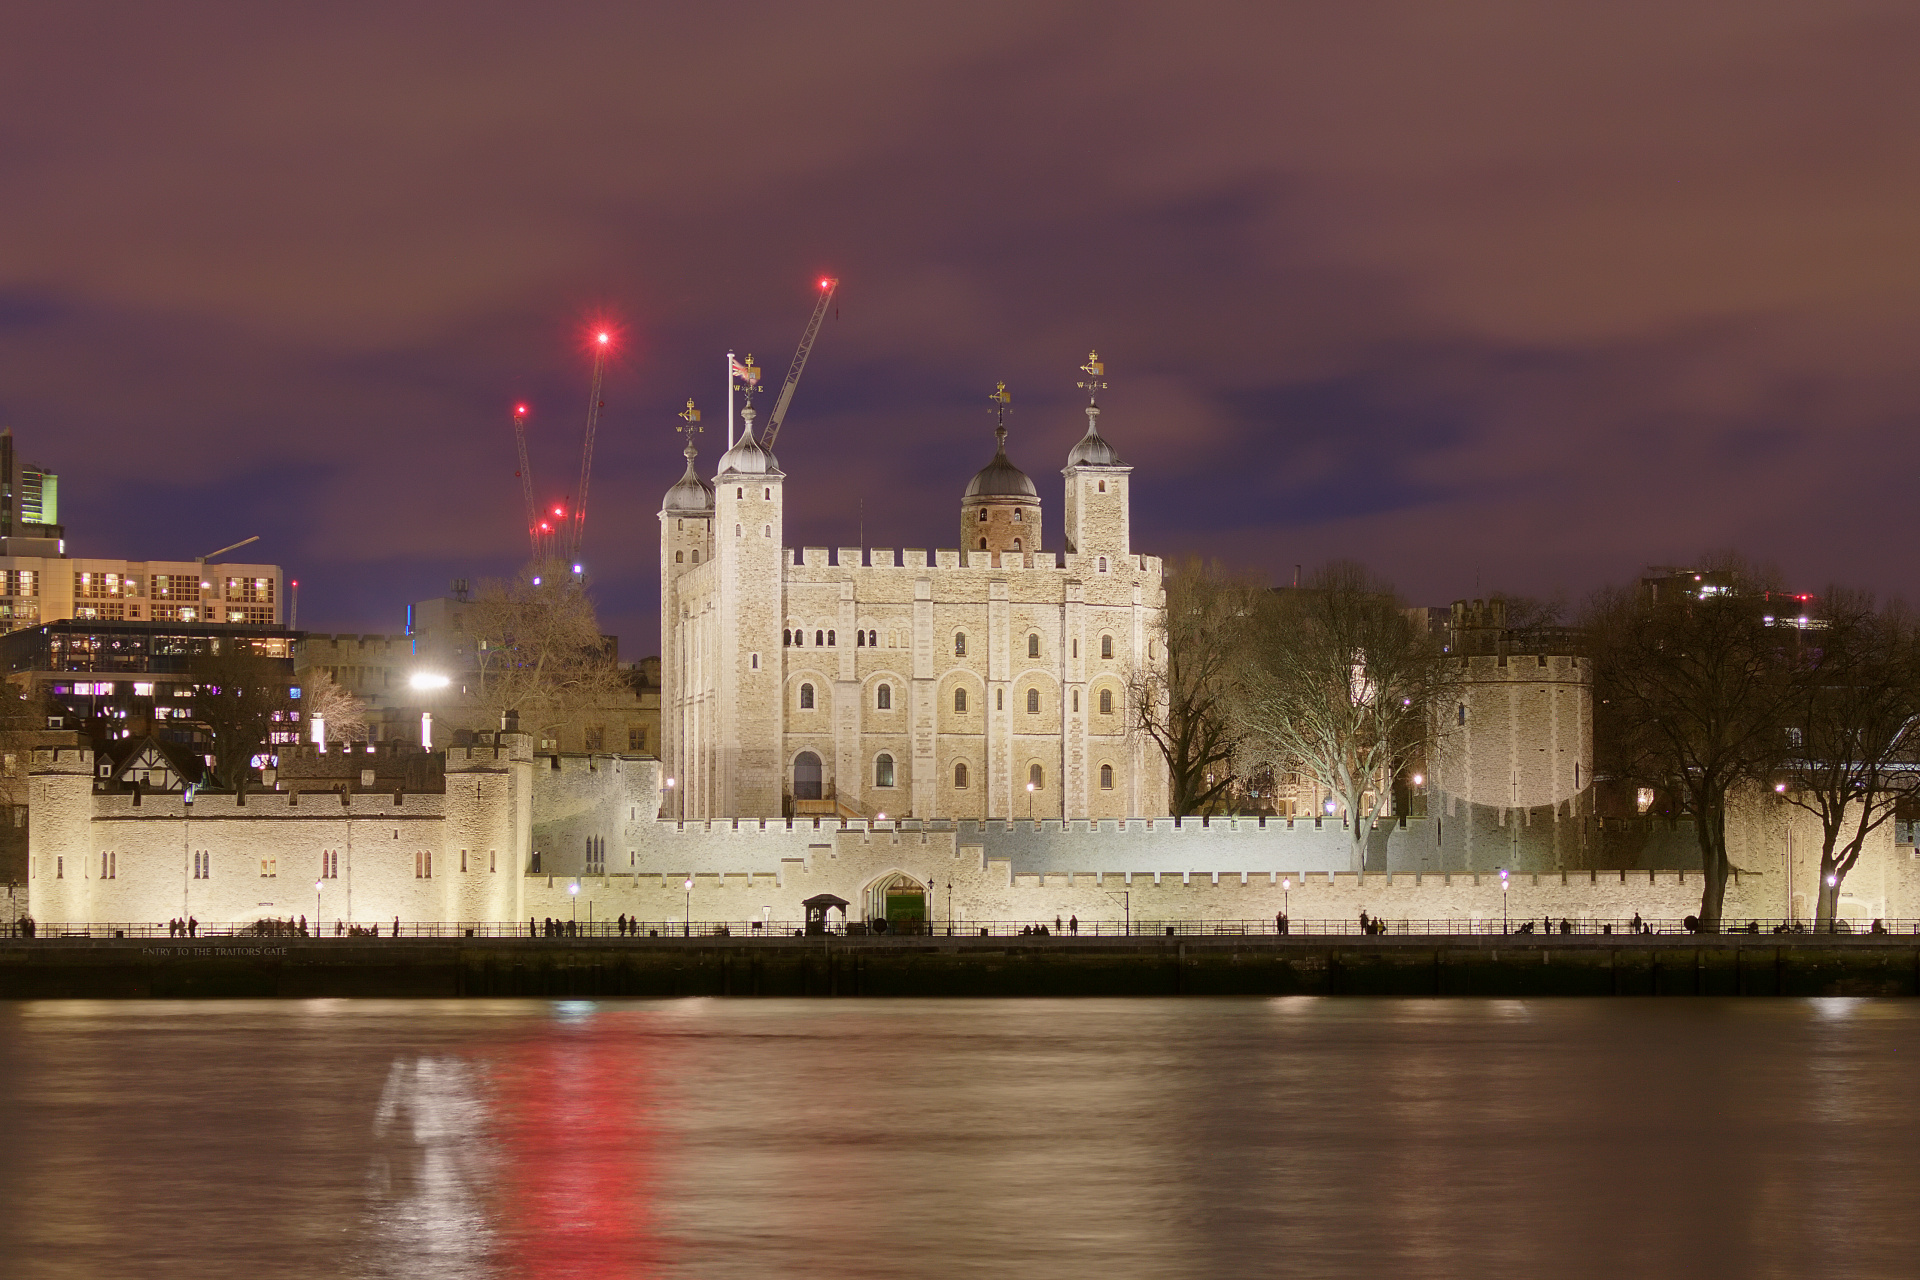 The Tower of London (Travels » London » London at Night)